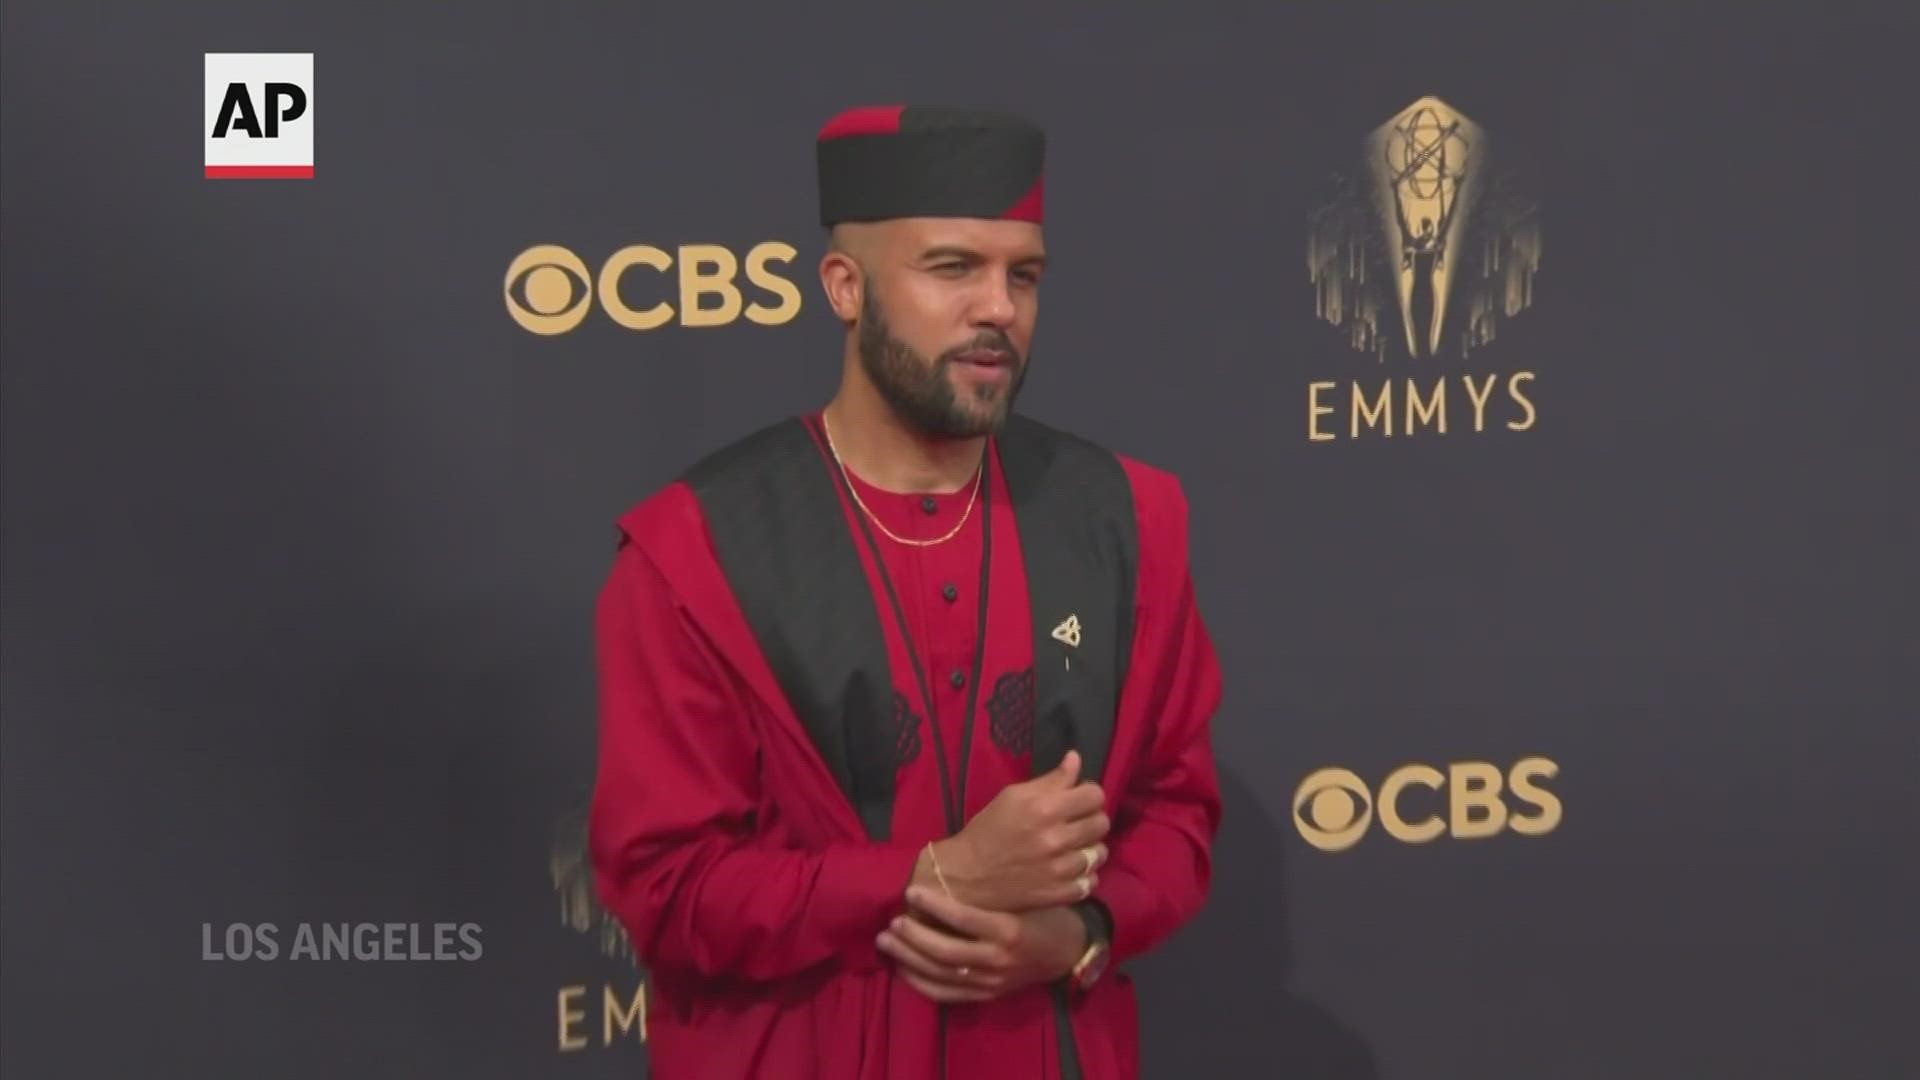 Austin Taylor Porn Hd 1080 - Emmys Red Carpet: Nicole Byer stuns, Billy Porter winged outfit | kvue.com